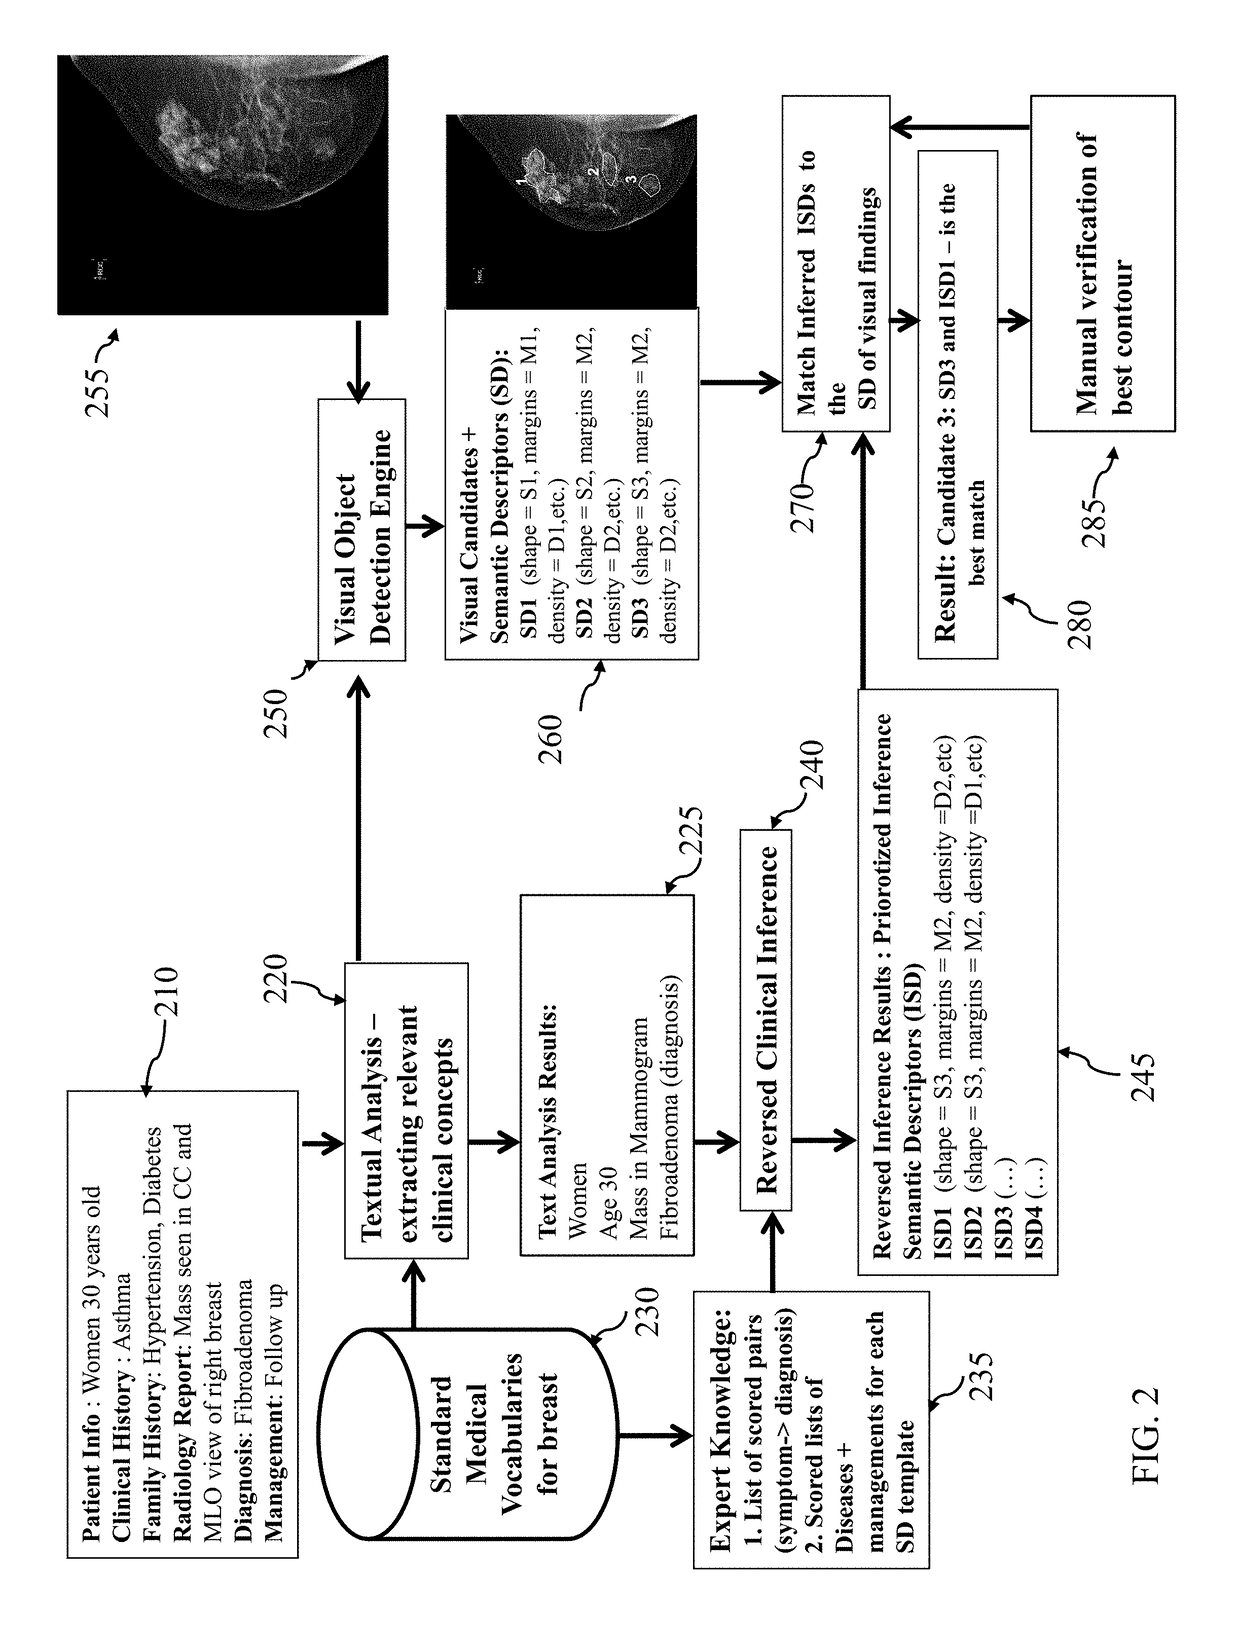 Method for automatic visual annotation of radiological images from patient clinical data